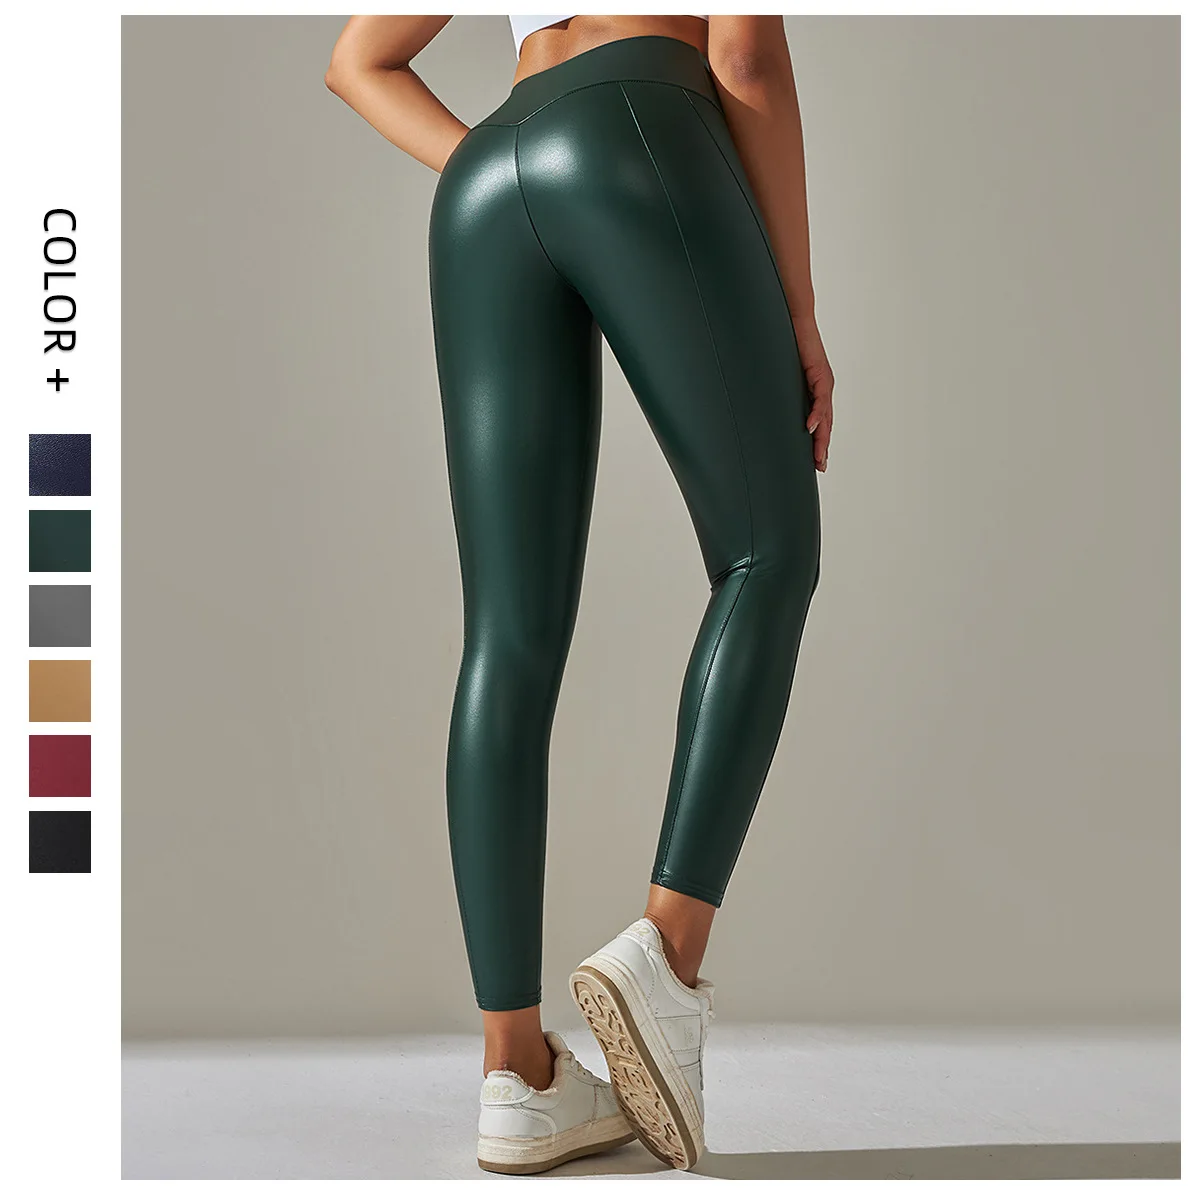 

New Patchwork PU Leather Pants Colorful High Waisted Leggings Running Fitness High Elasticity Cropped Pants For Women